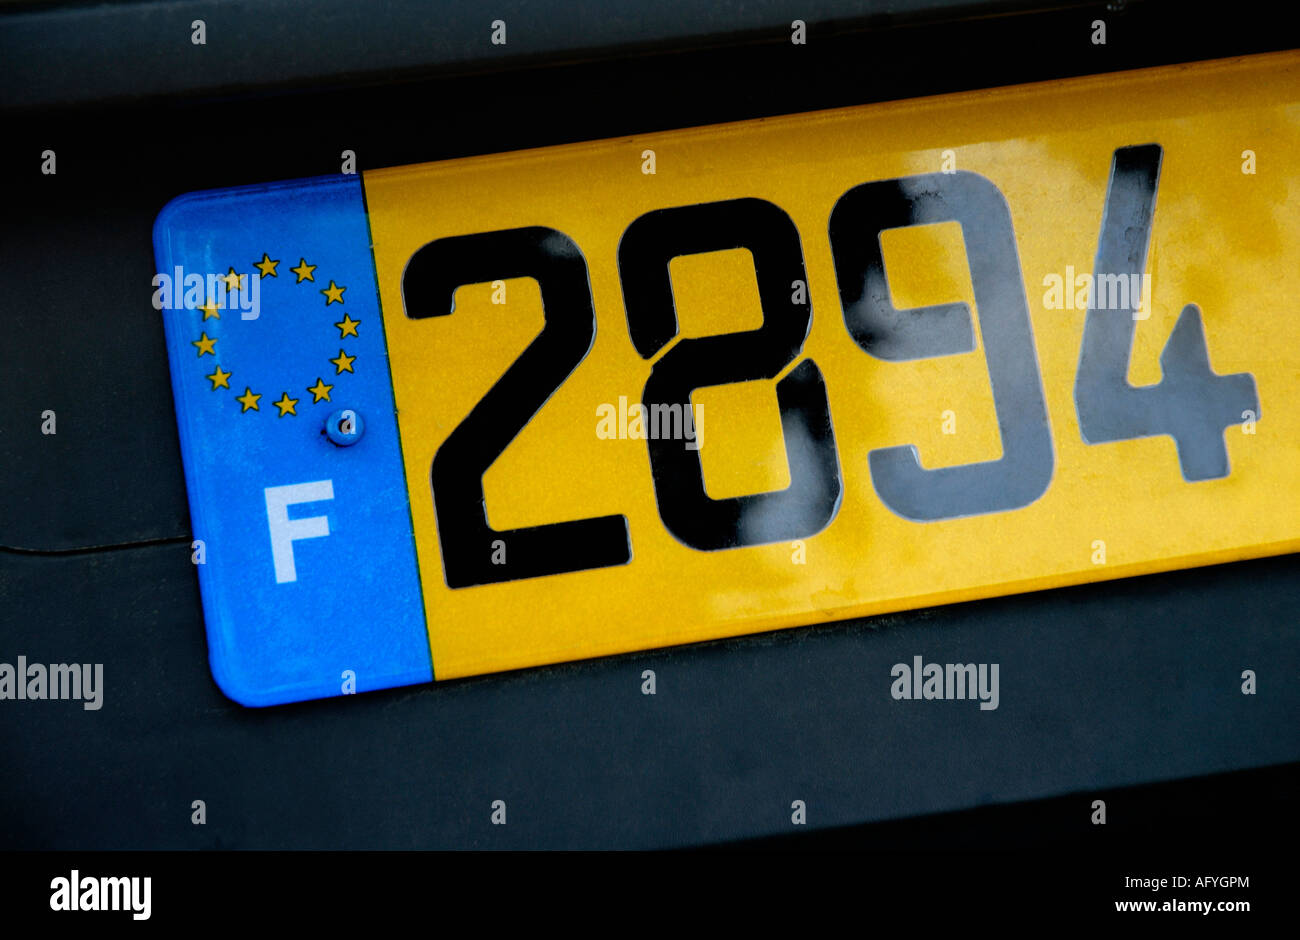 LICENSE PLATE OF FRENCH CAR Stock Photo